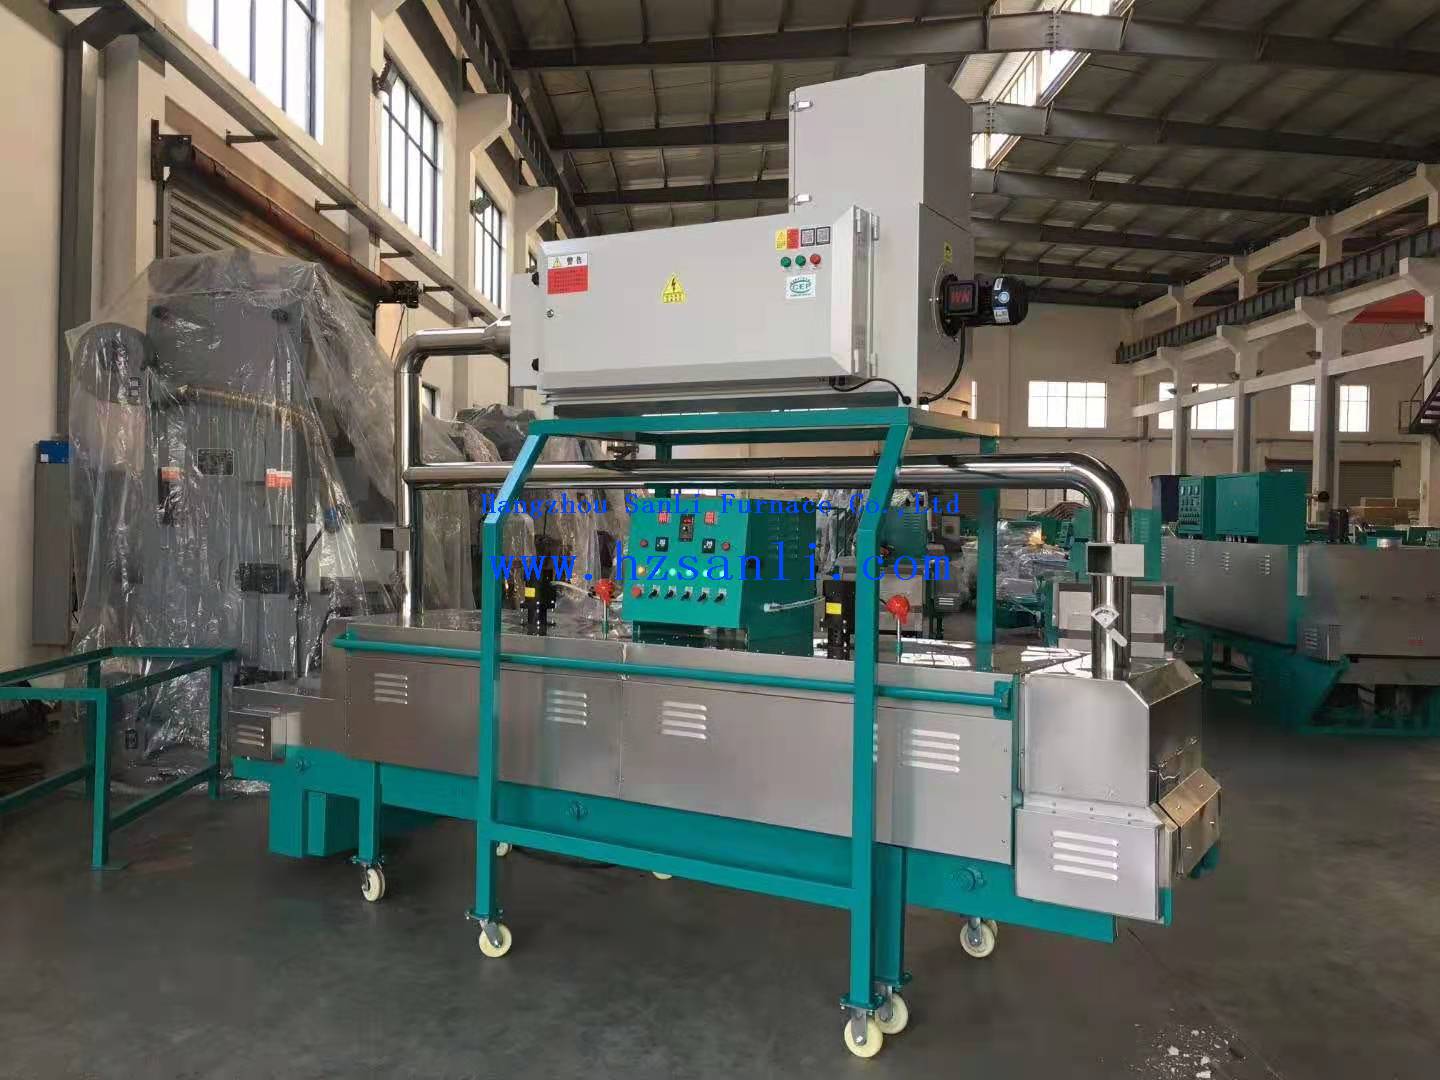 SANLI FURNACE RJC Series Continuous Hot Wind Tempering Furnace